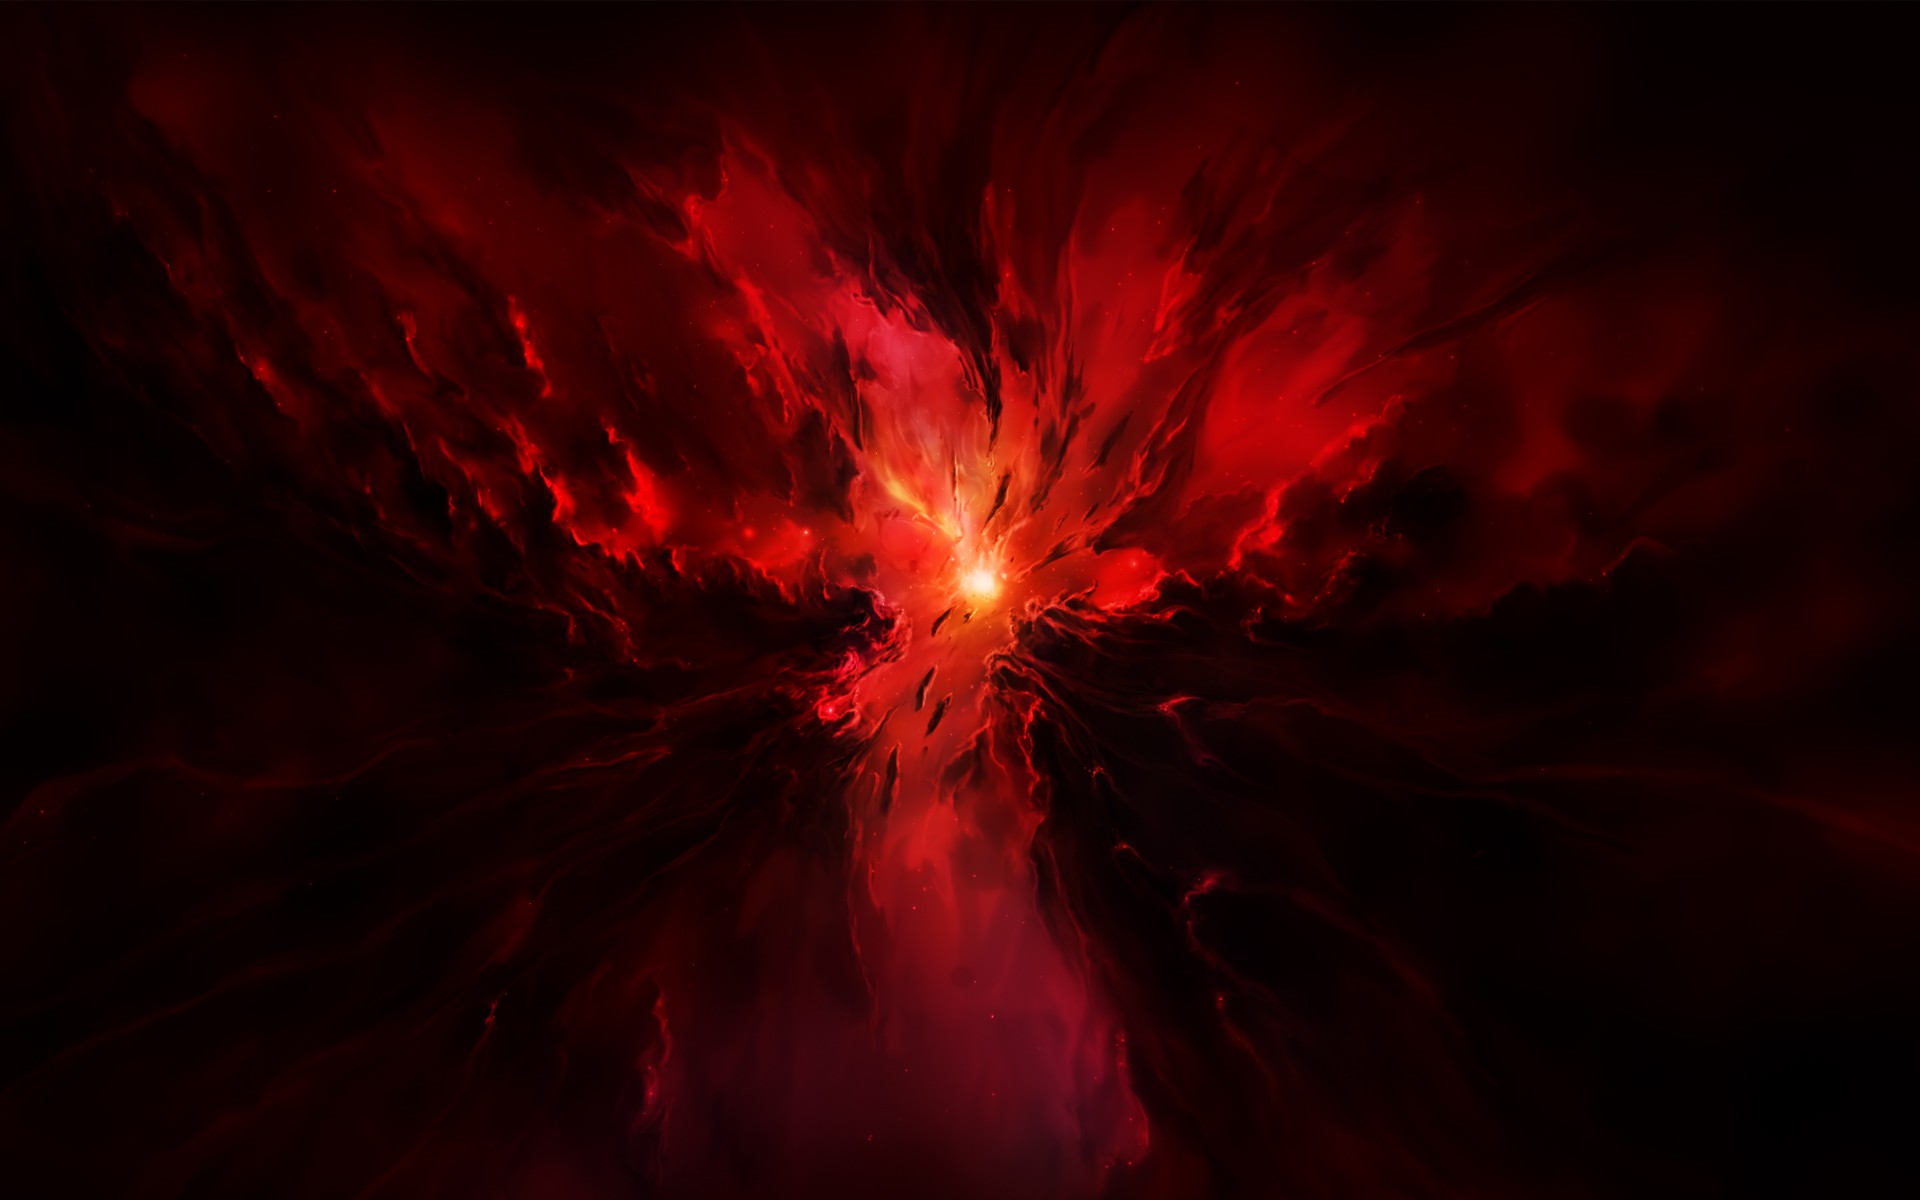 Space Artwork Science Fiction Universe Red Abstract Space Clouds Red Star Stars Space Art Nebula Dig 1920x1200